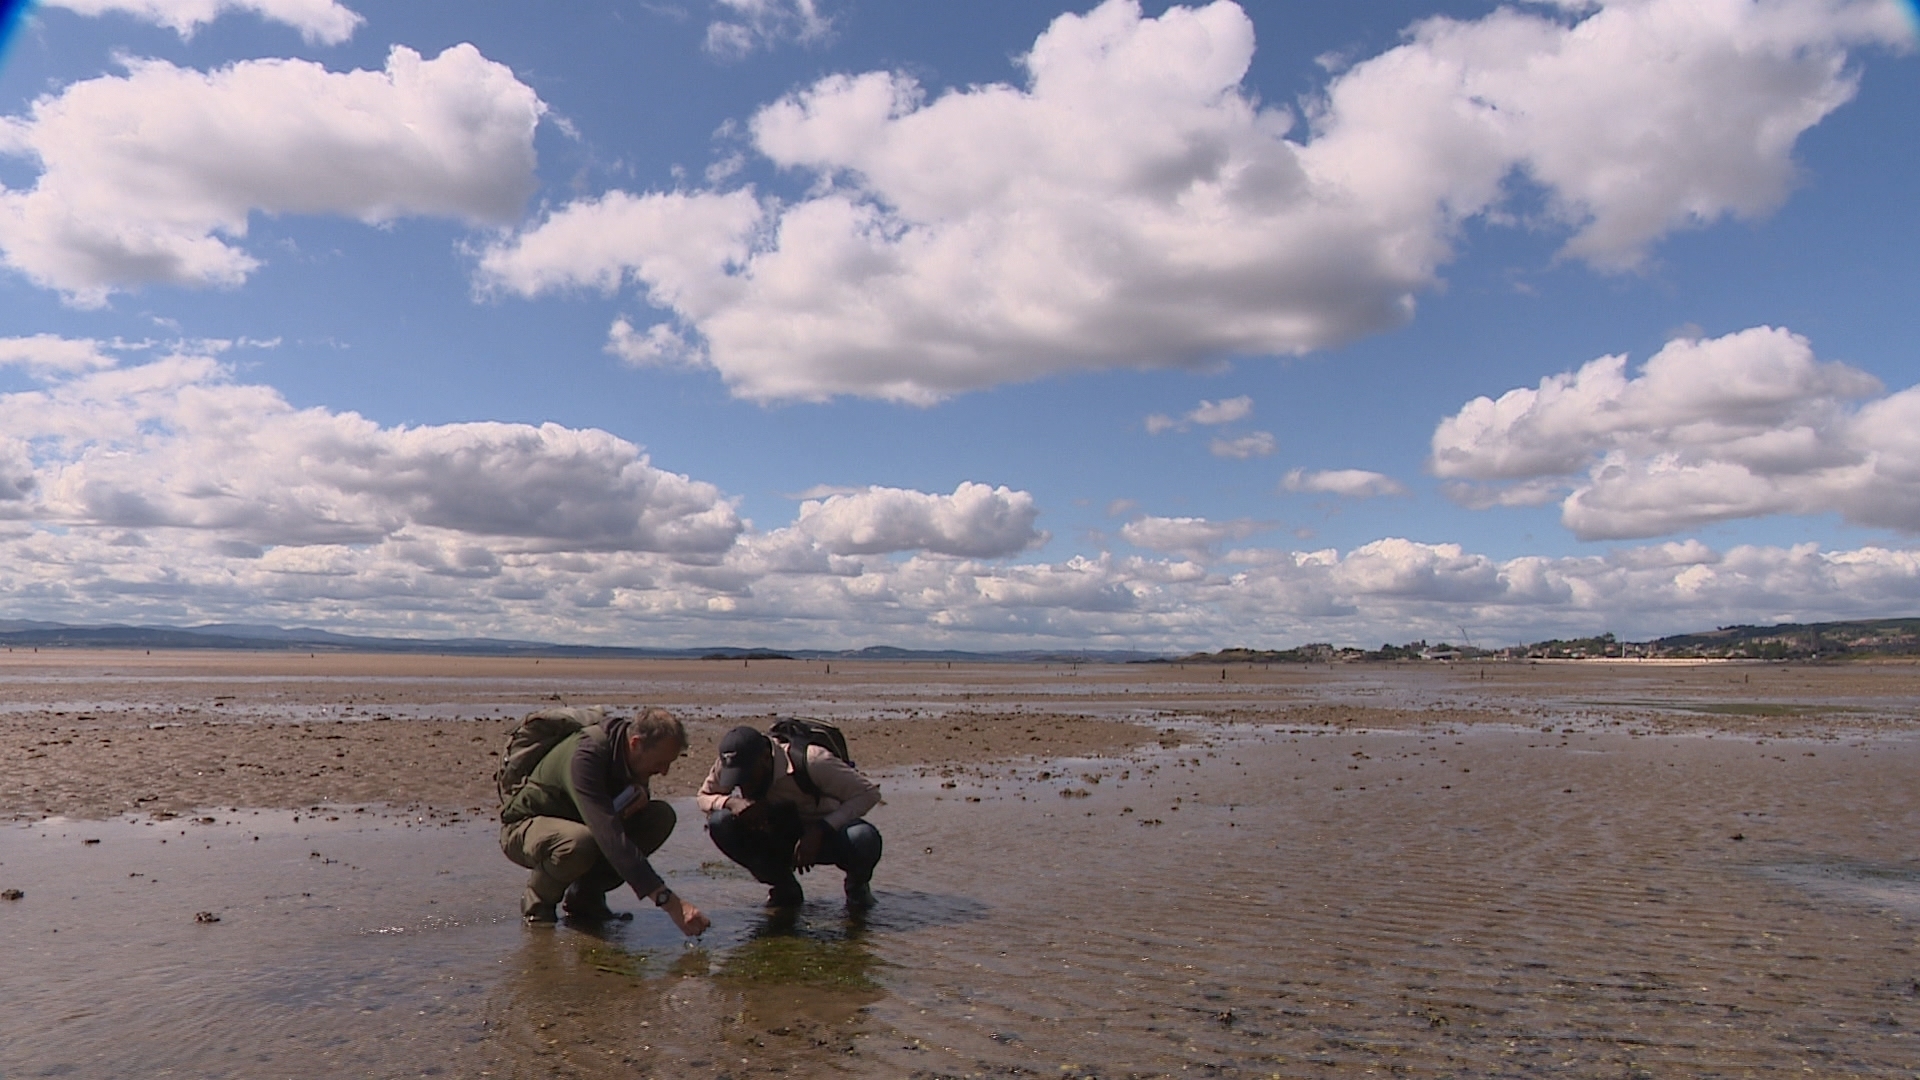 Marine biologists have already begun mapping seagrass meadows at Kinghorn.